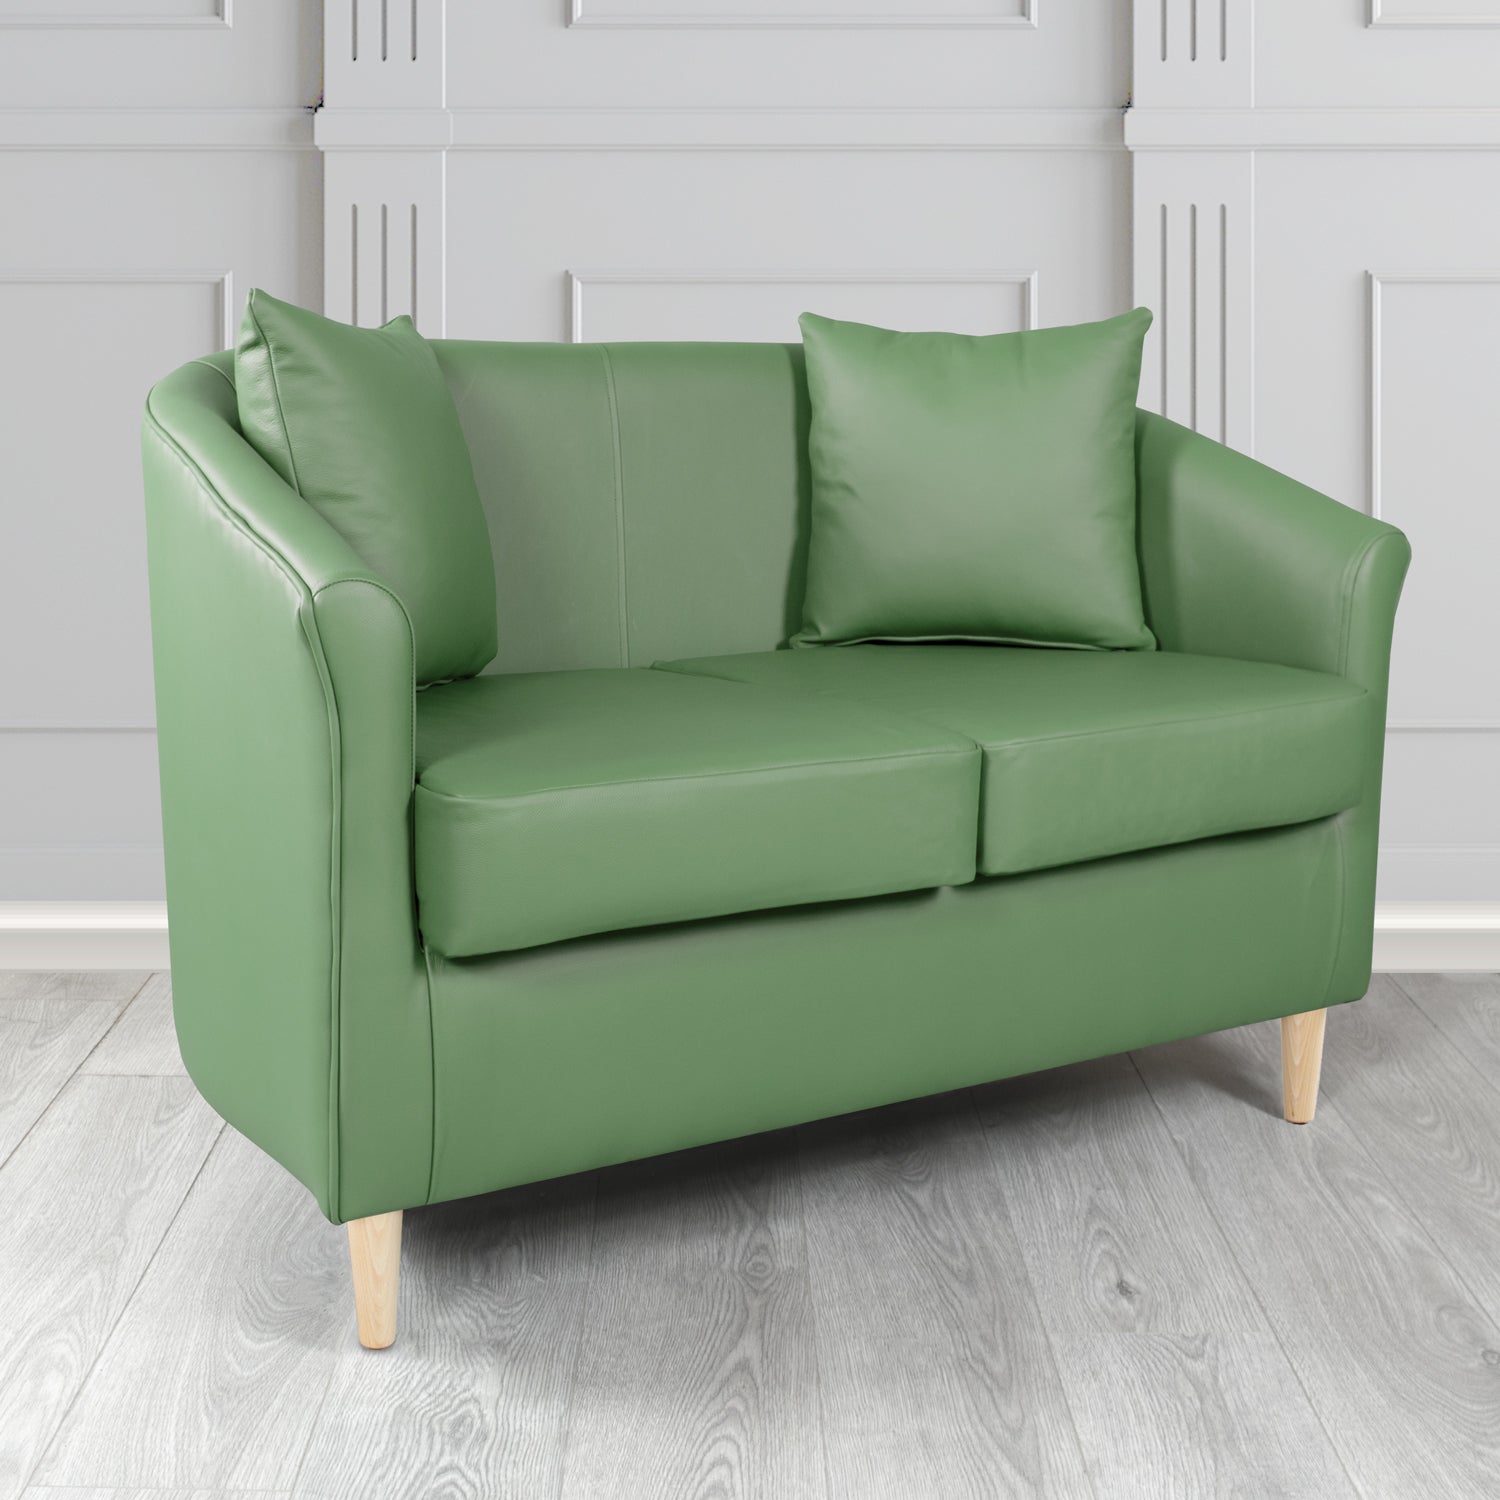 St Tropez Shelly Lichen Crib 5 Genuine Leather 2 Seater Tub Sofa with Scatter Cushions - The Tub Chair Shop